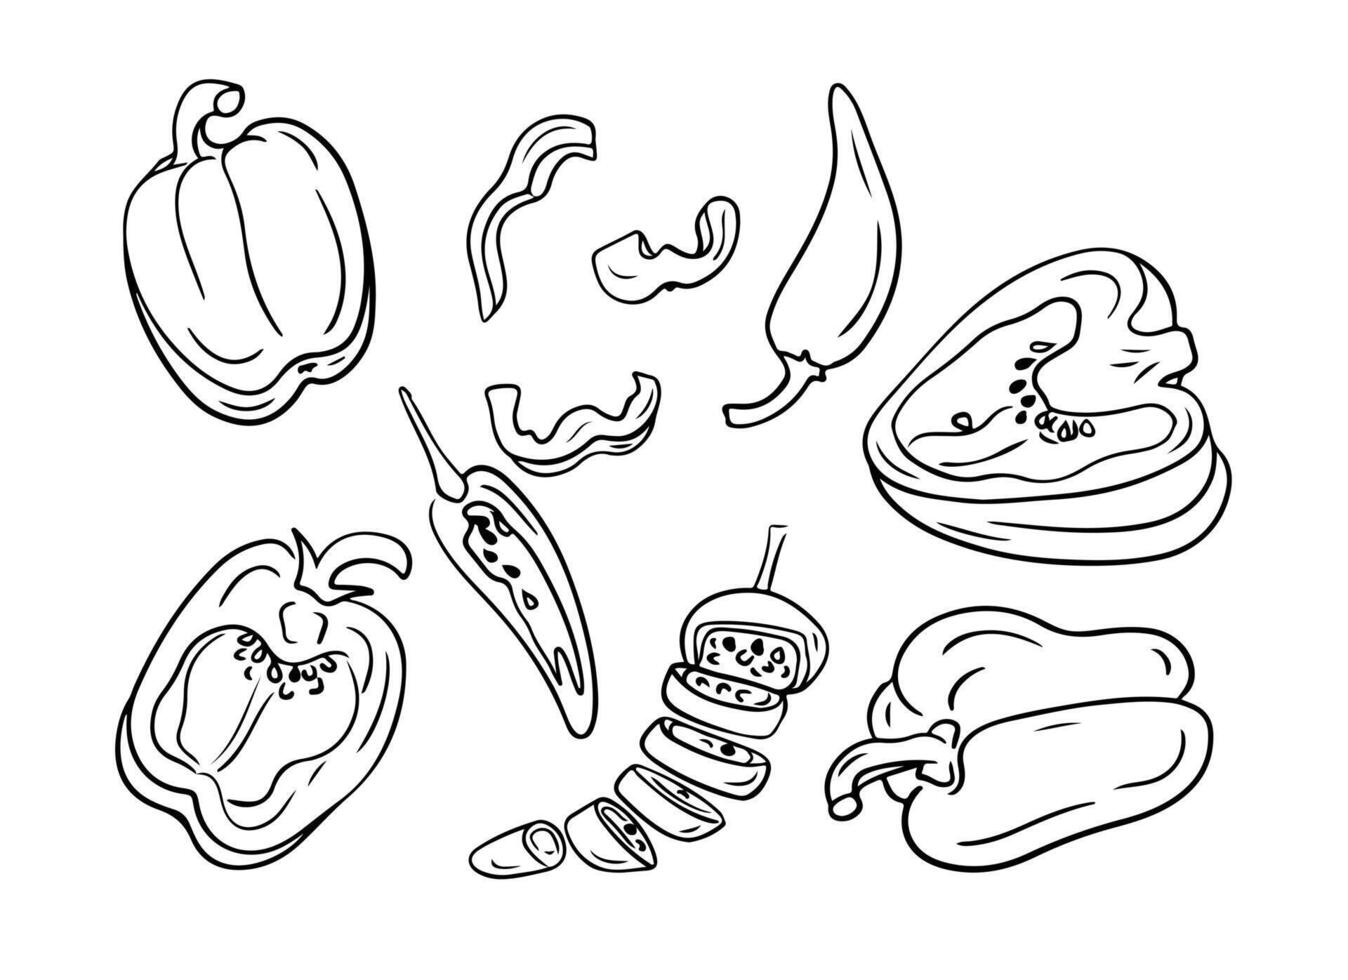 Black hand drawn sketchy set of bell pepper. Doodle contour whole and cut vegetables for healthy eating on white background. Ideal for coloring pages, tattoo, pattern vector